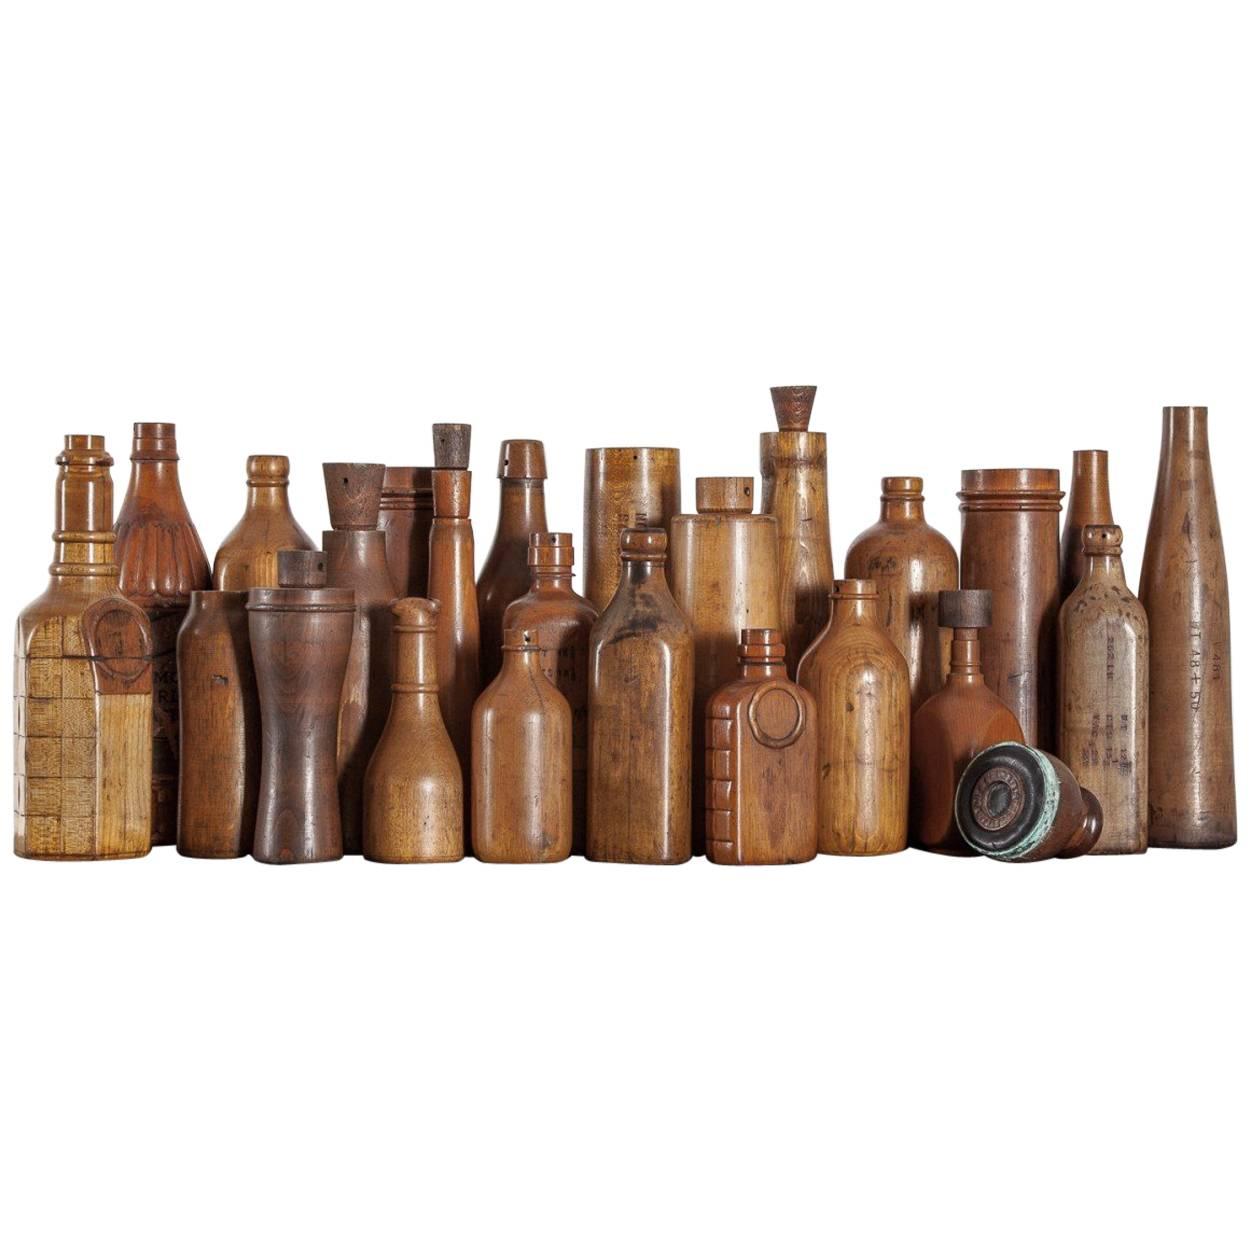 Collection of Wooden Bottle Molds from the John Lumb and Co. Glassworks